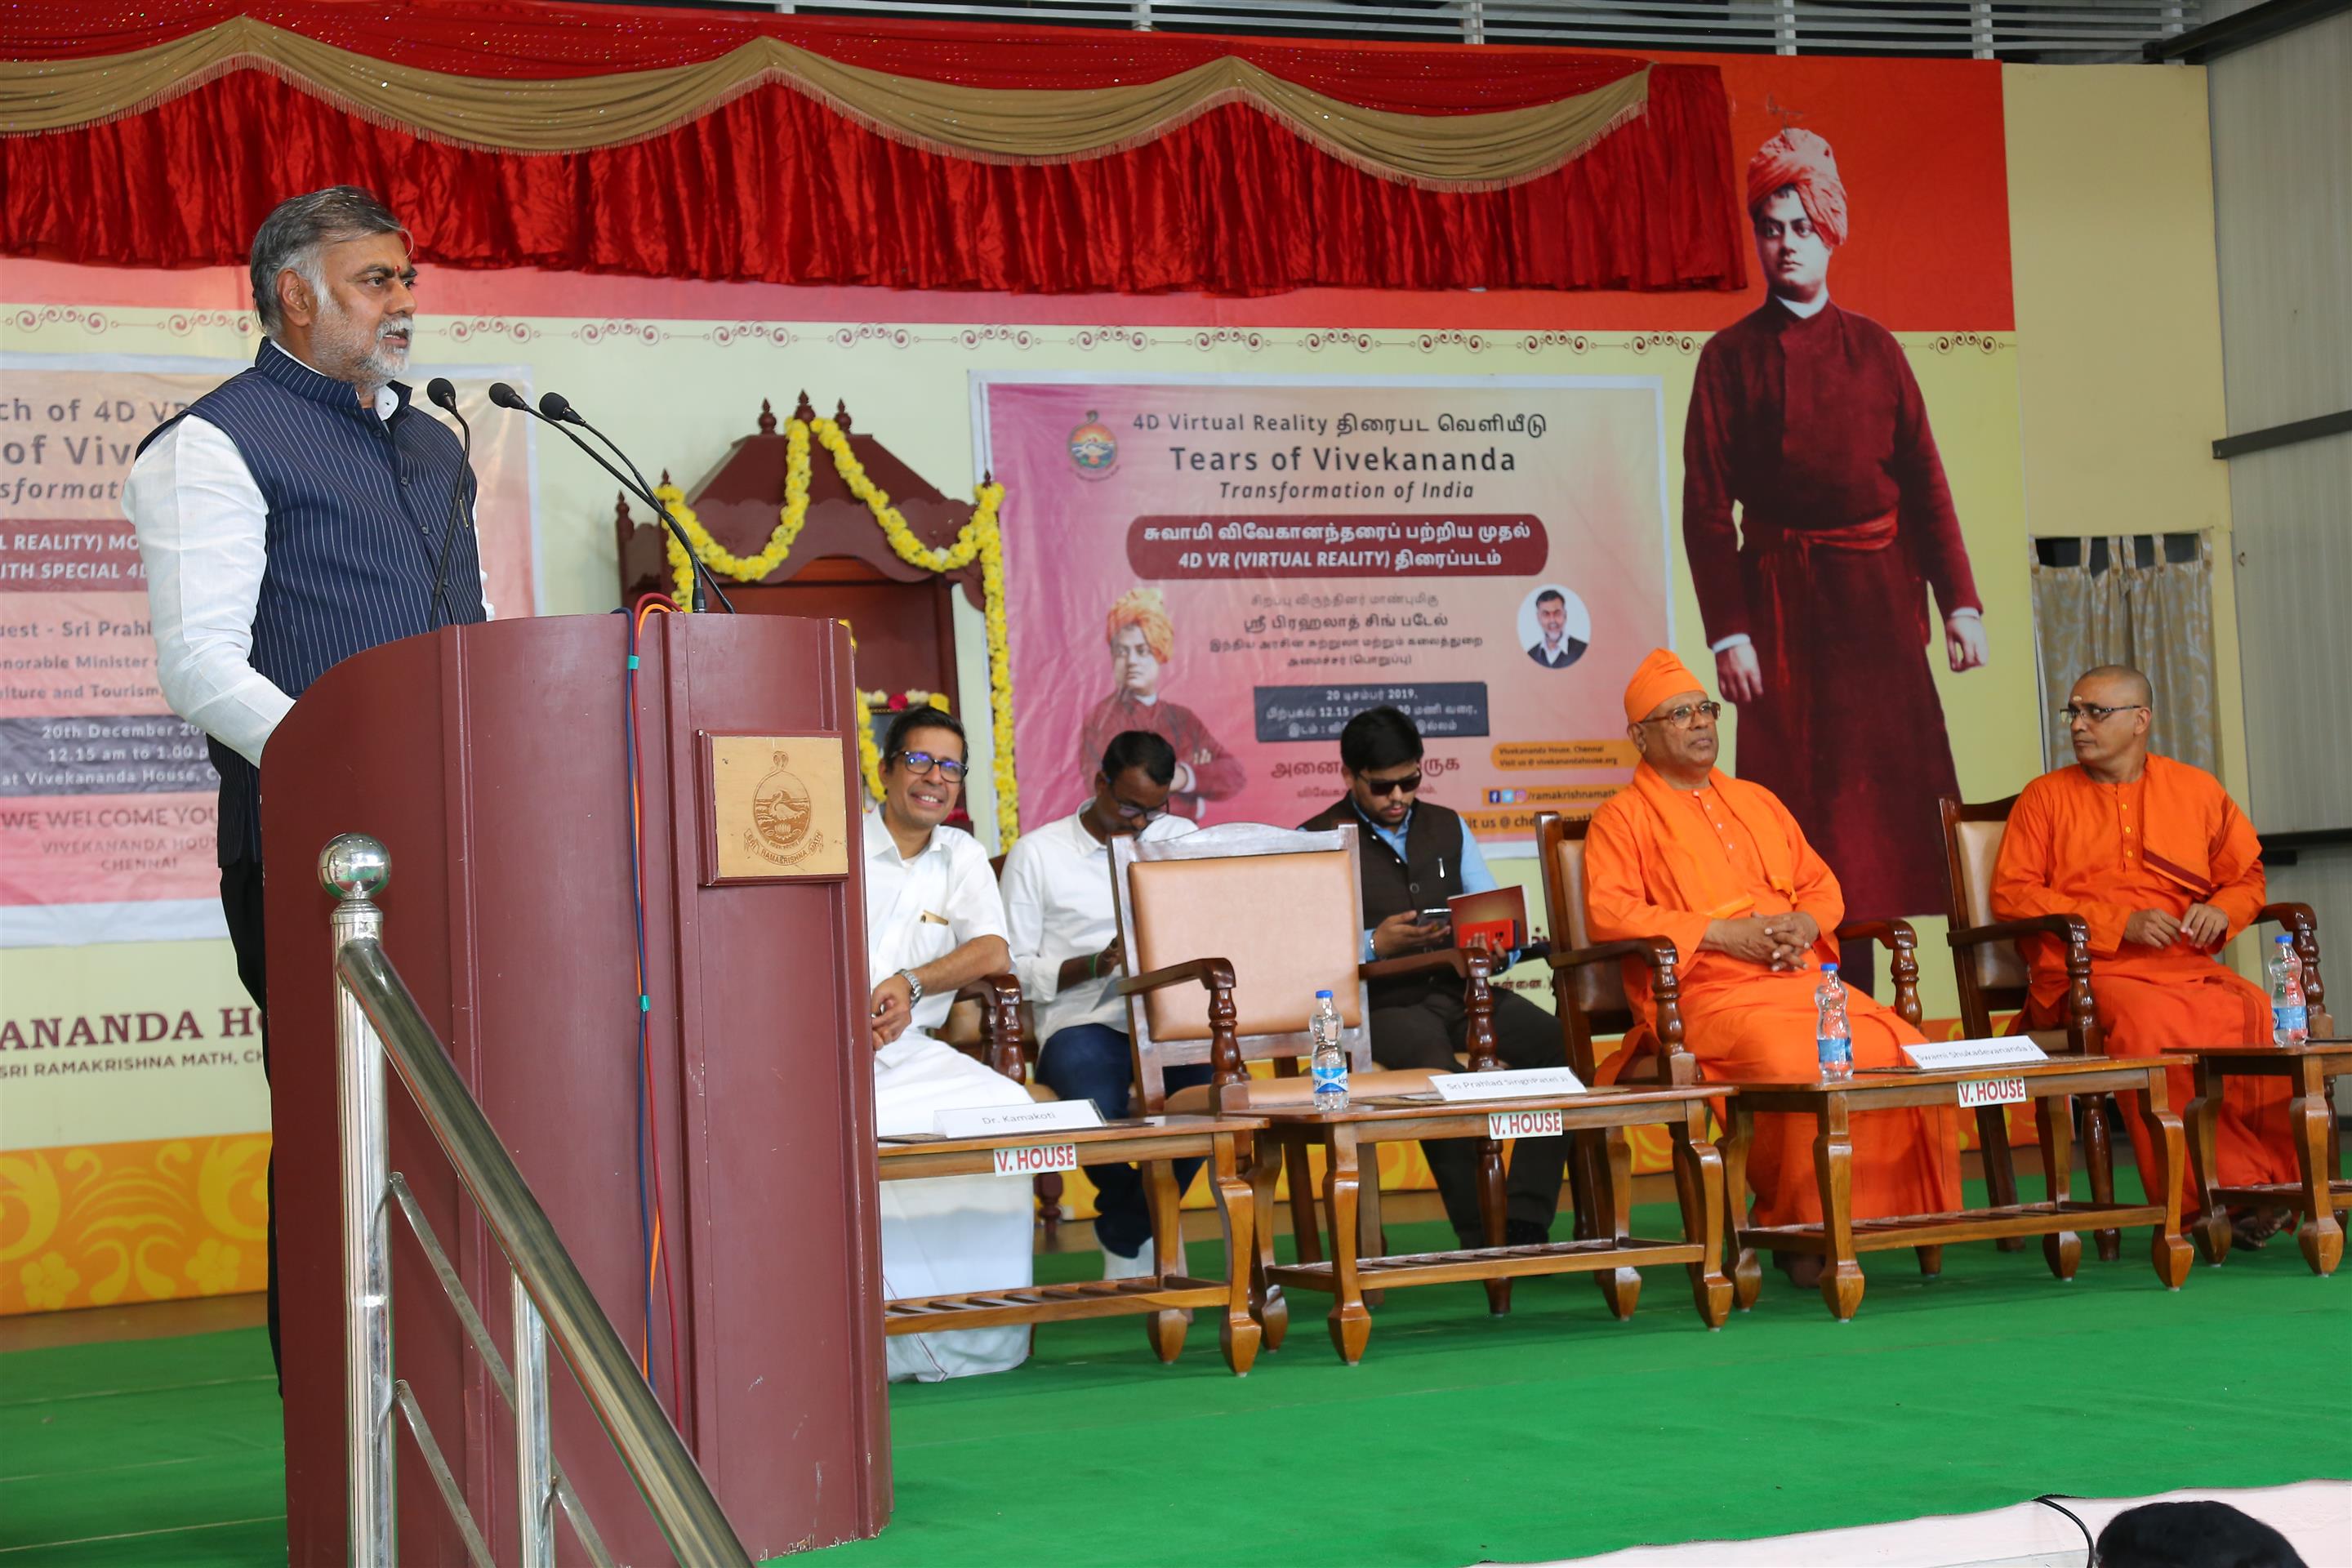 Union Minister of State (I/C) for Culture and Tourism Shri Prahlat Singh Patel is addressing the gathering at the launch of 4D VR Movie 'Tears of Vivekananda' - Transformation of life today in Chennai. (December 20, 2019)